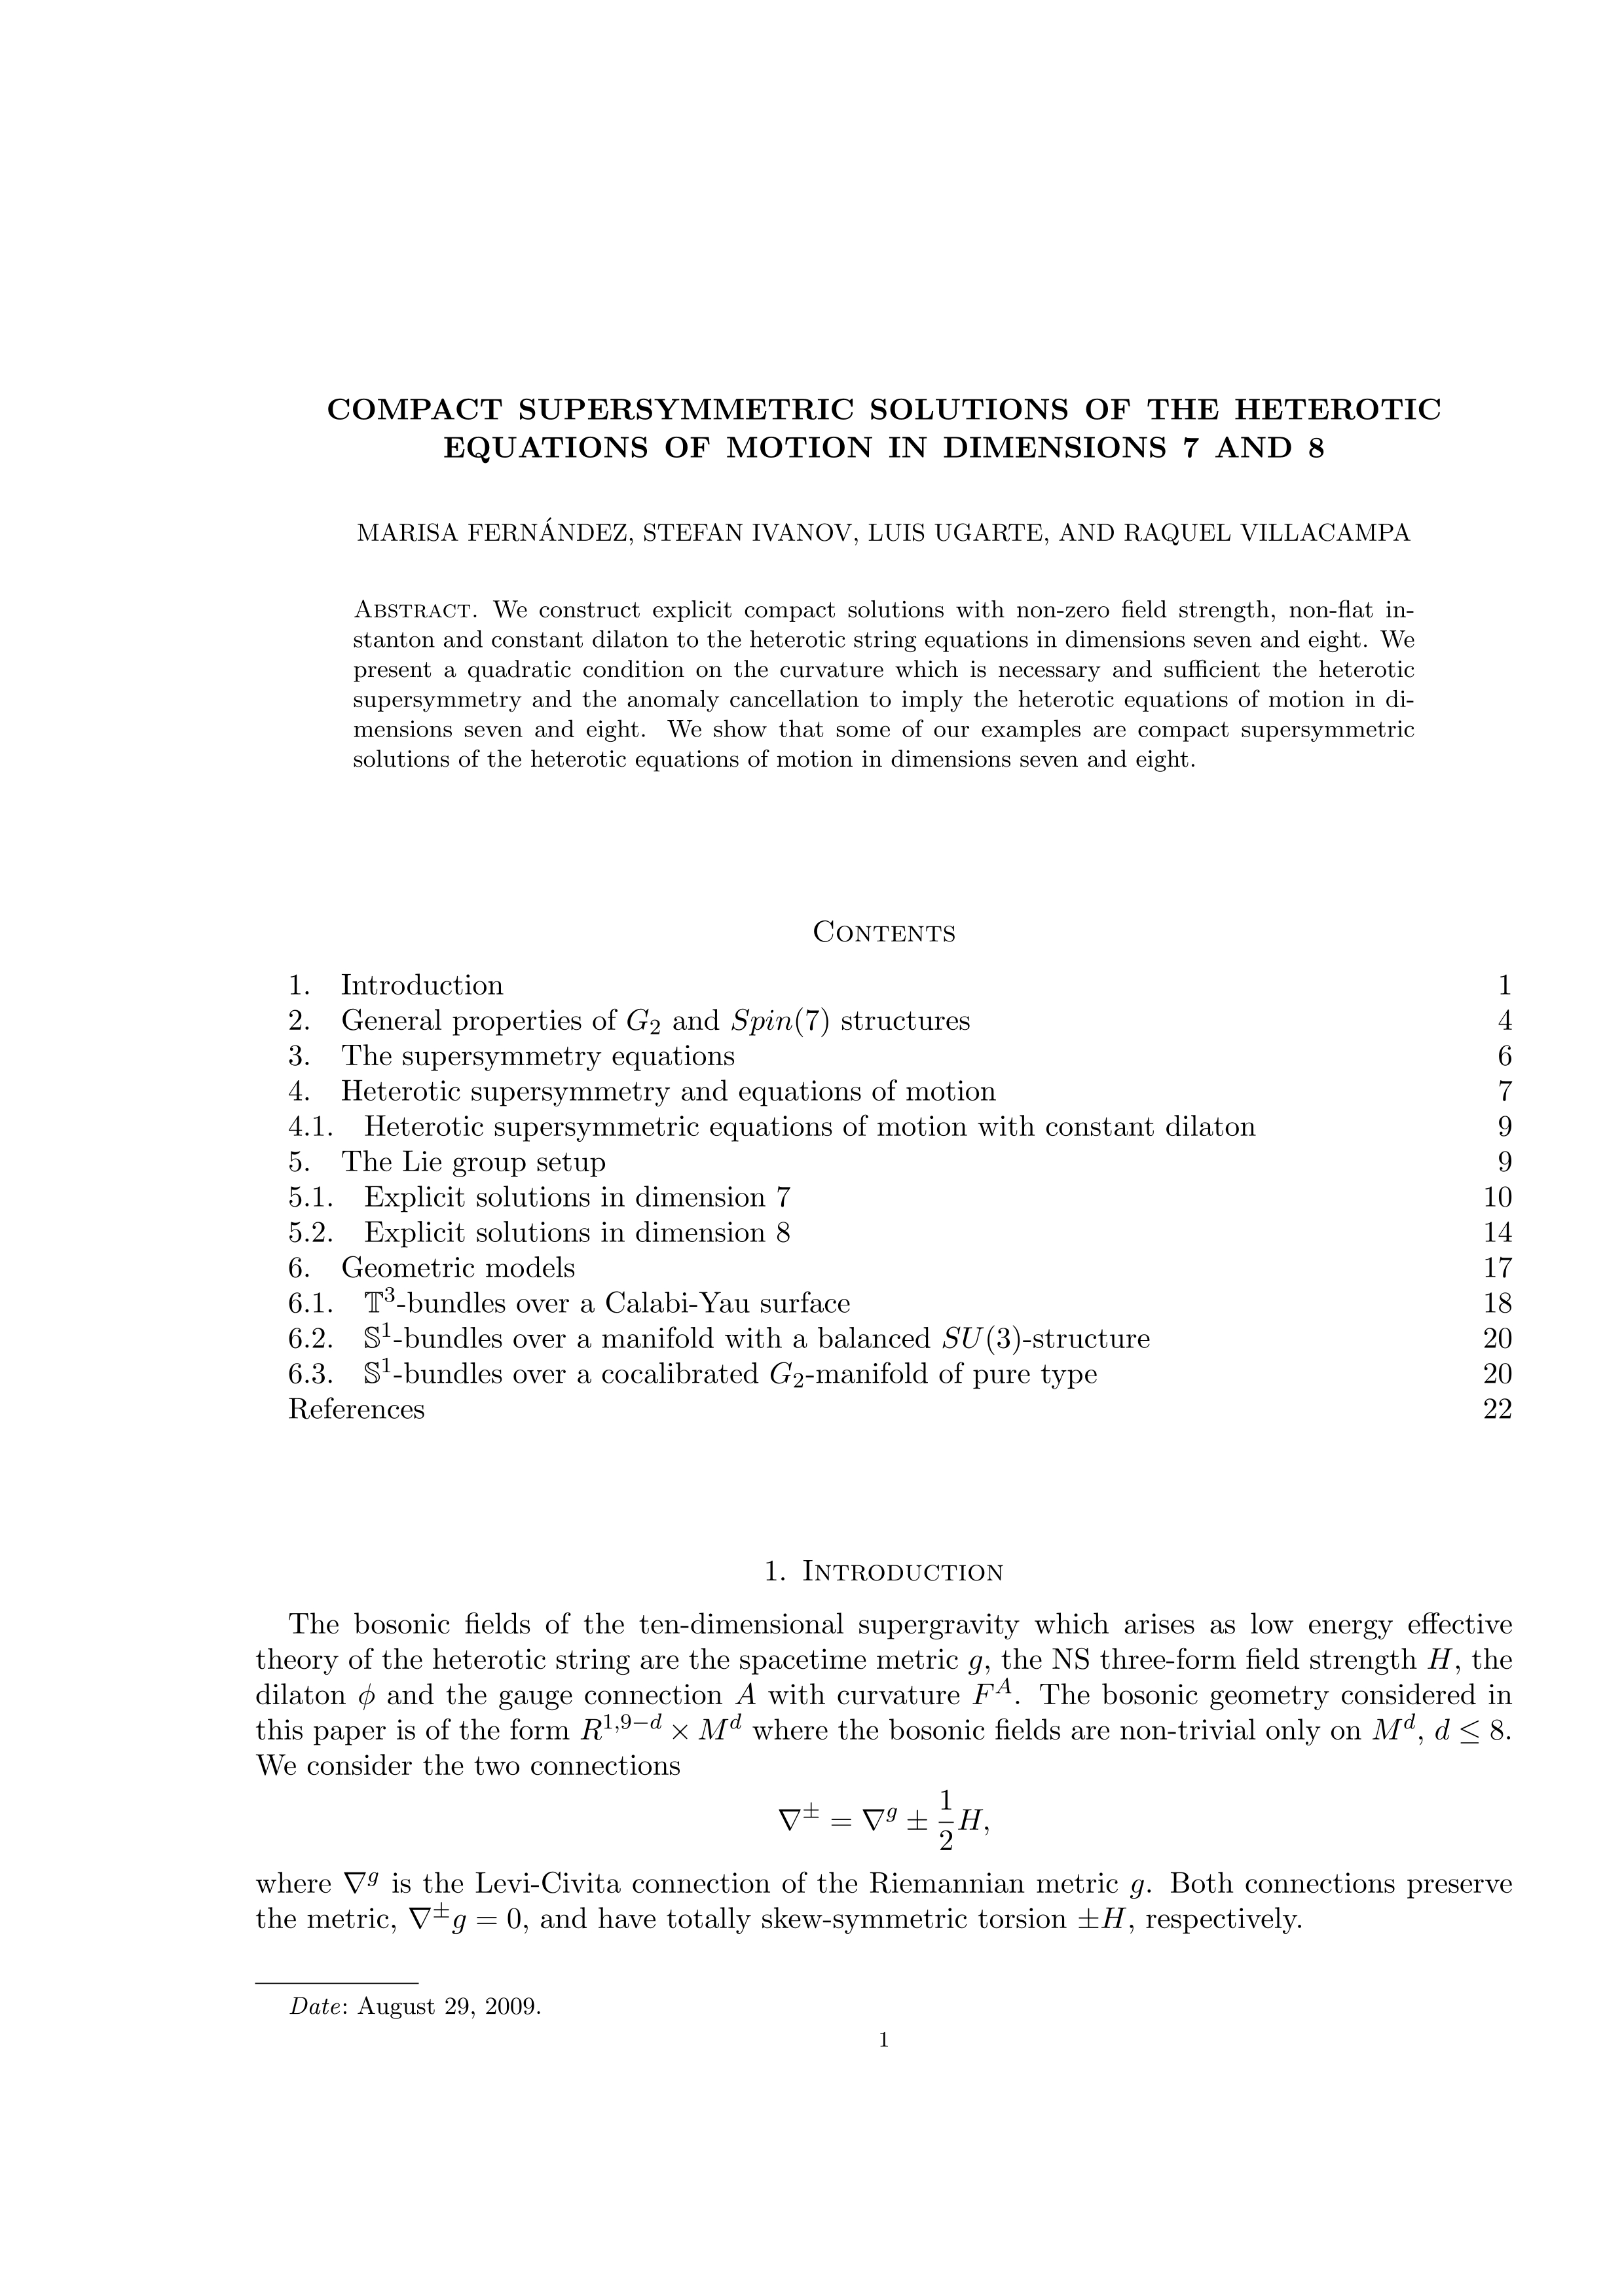 Compact supersymmetric solutions of the heterotic equations of motion in dimensions 7 and 8